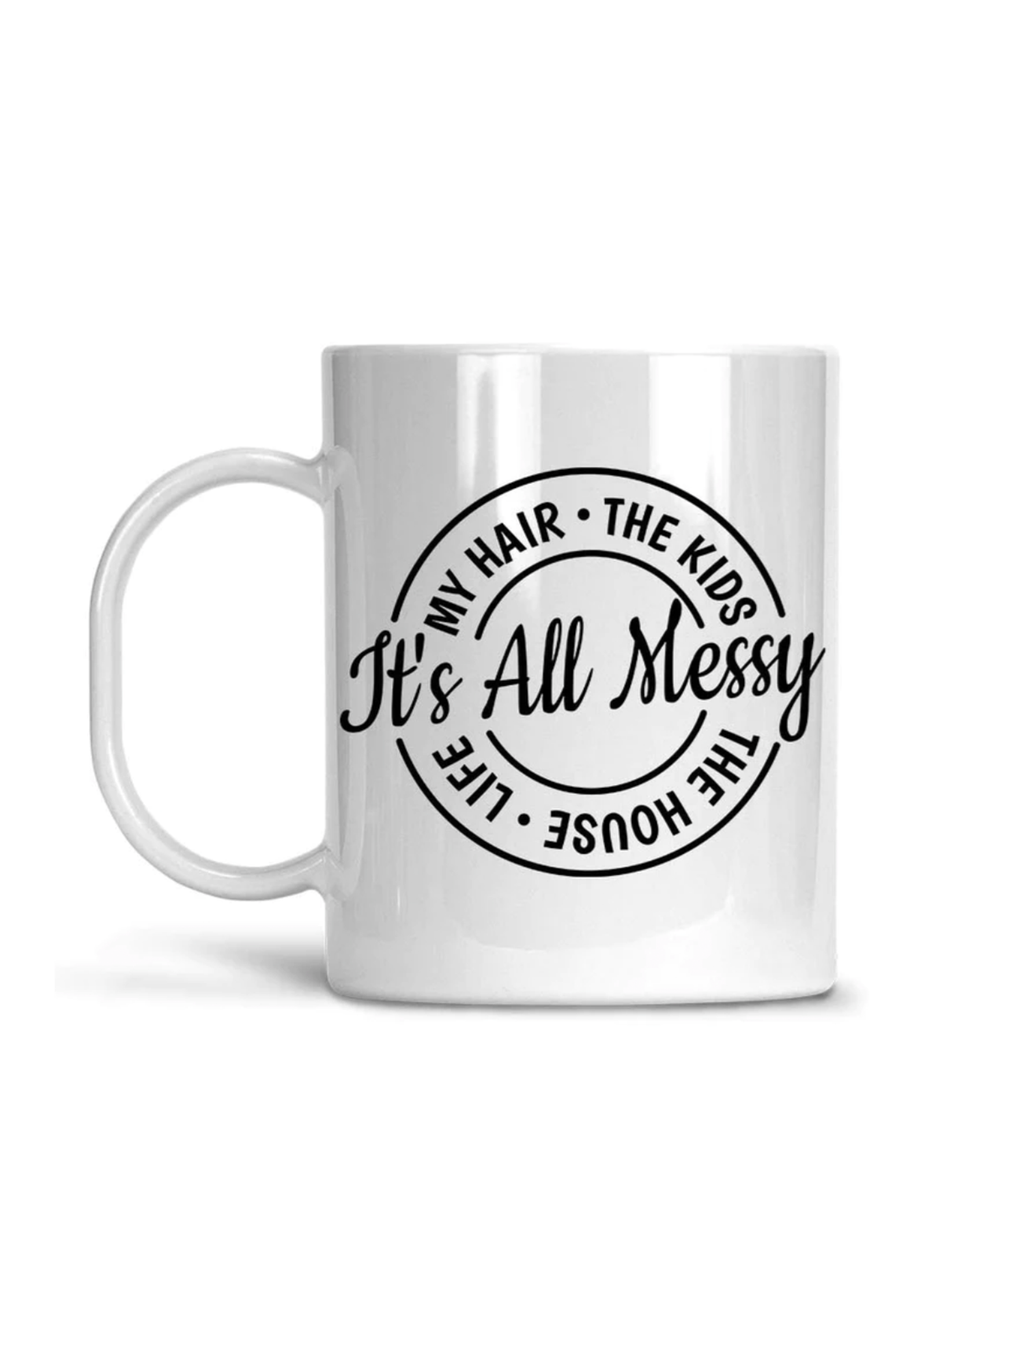 All Messy Mug - Stitch And Feather